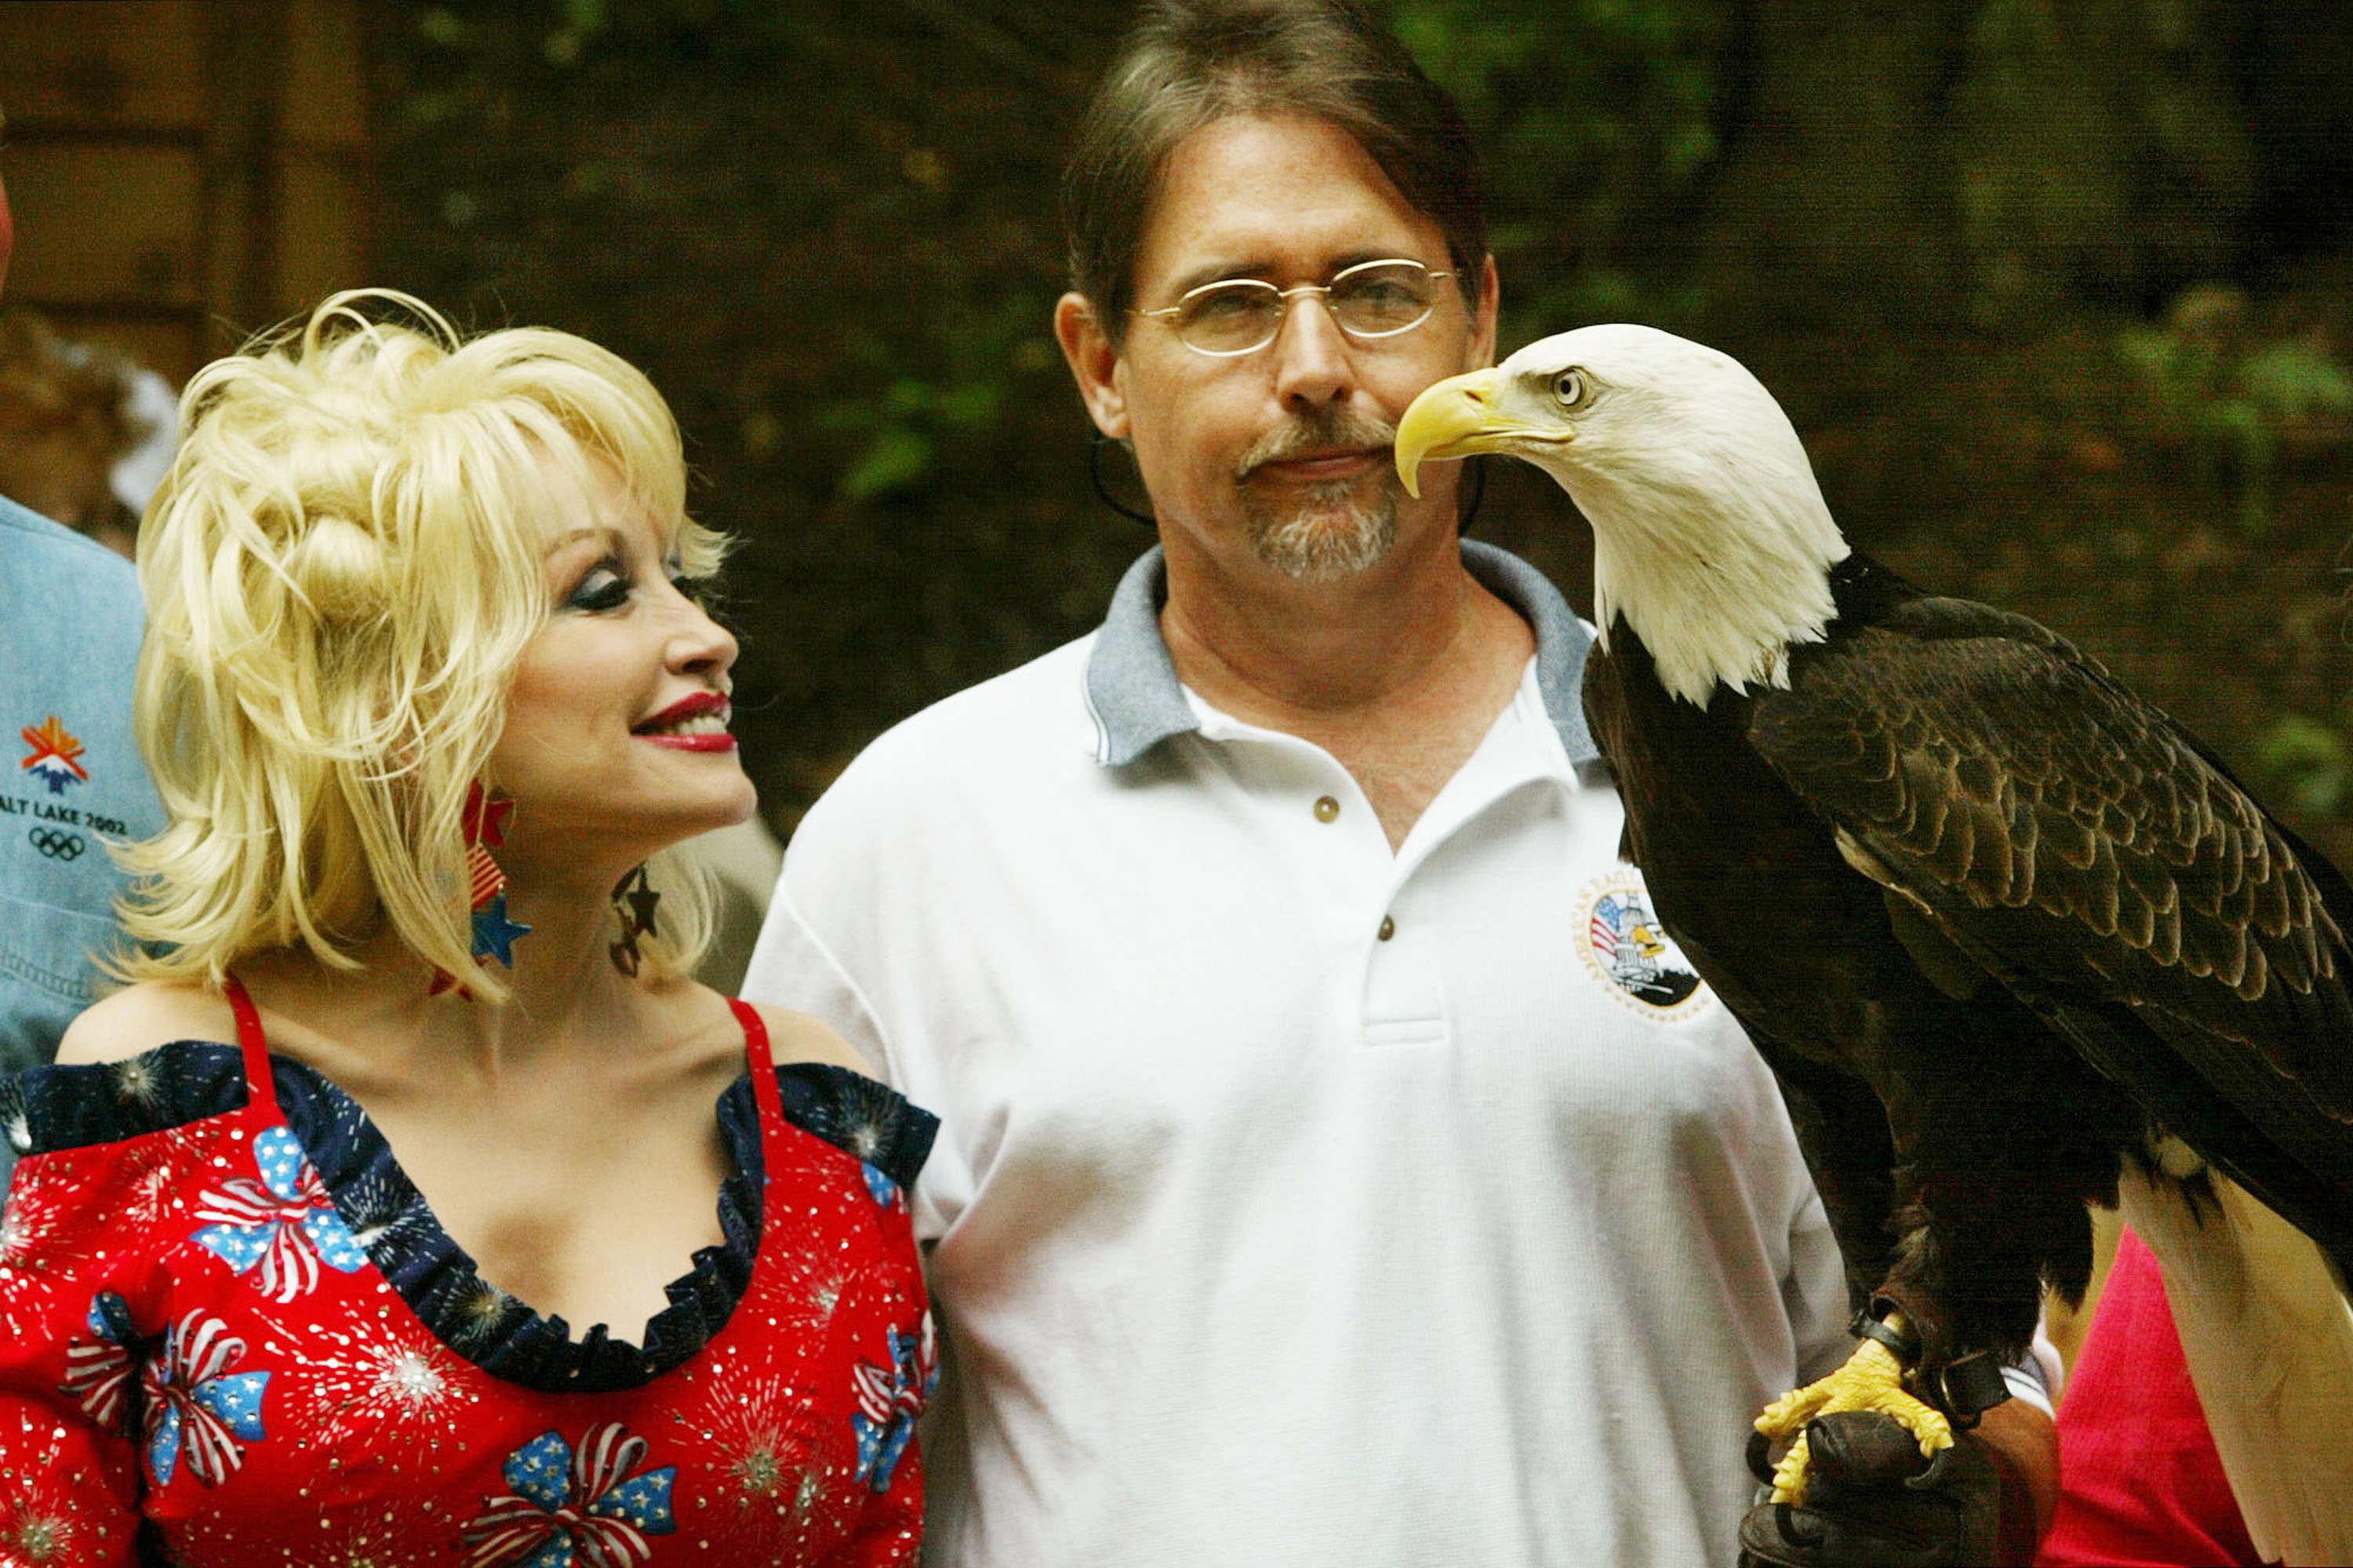 Dolly Parton stands next to a Bald Eagle named "America" being held by Al Cecere during an event at the National Zoo July 2, 2003 in Washington, DC.